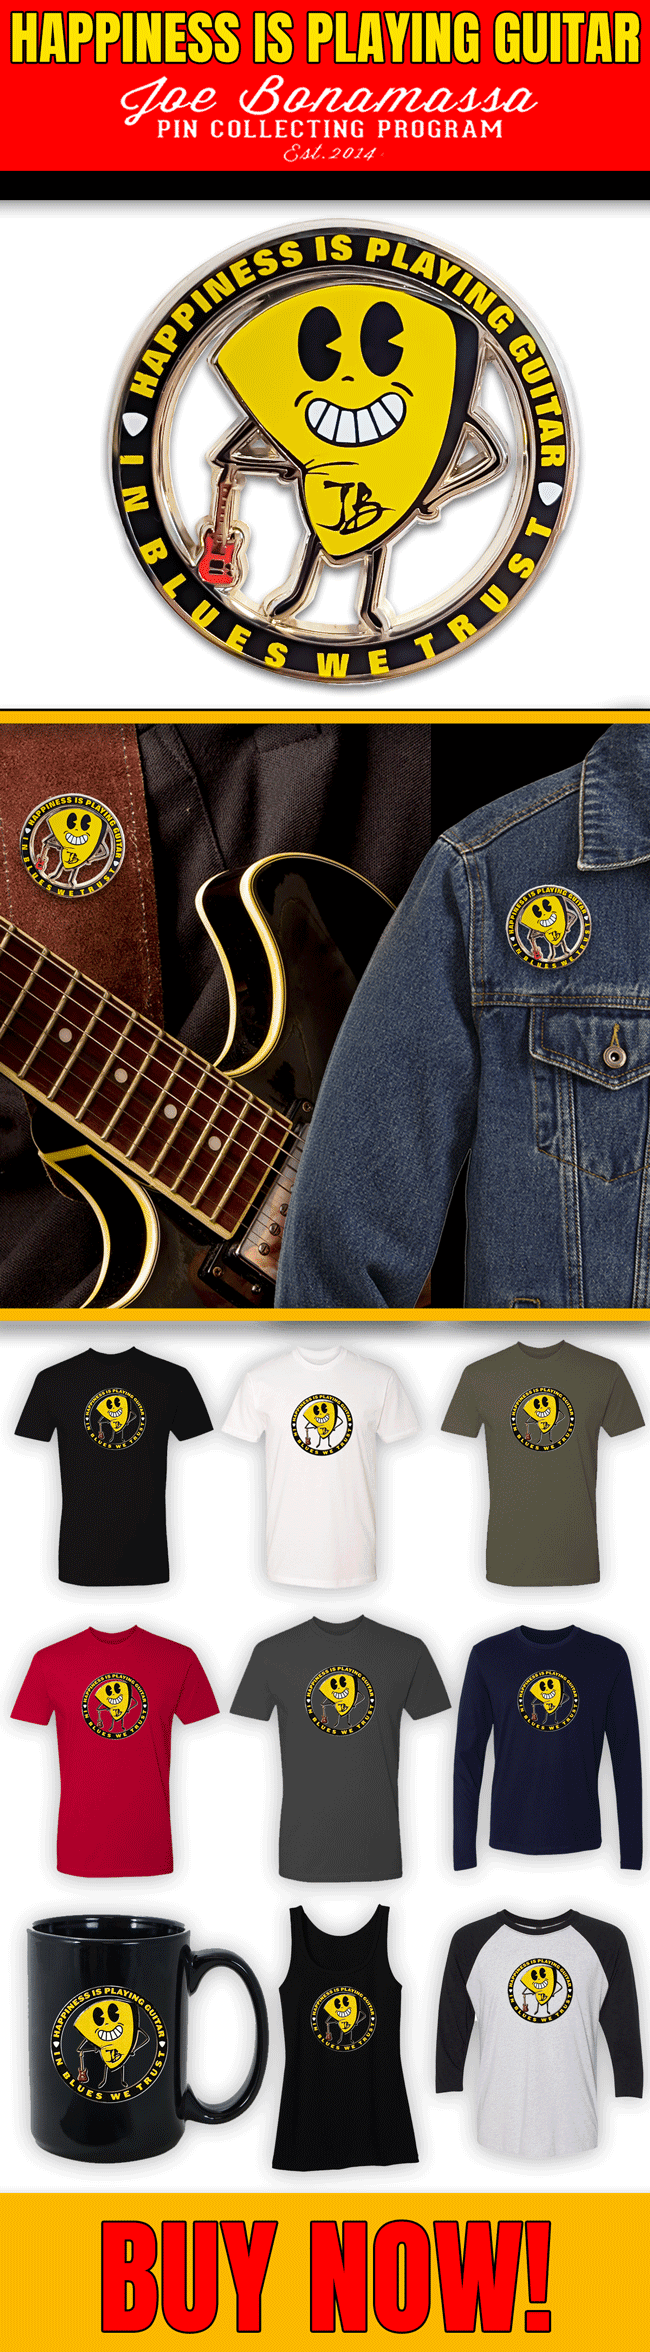 New pin - "Happiness is playing guitar" - it's true, right? Get yours here!